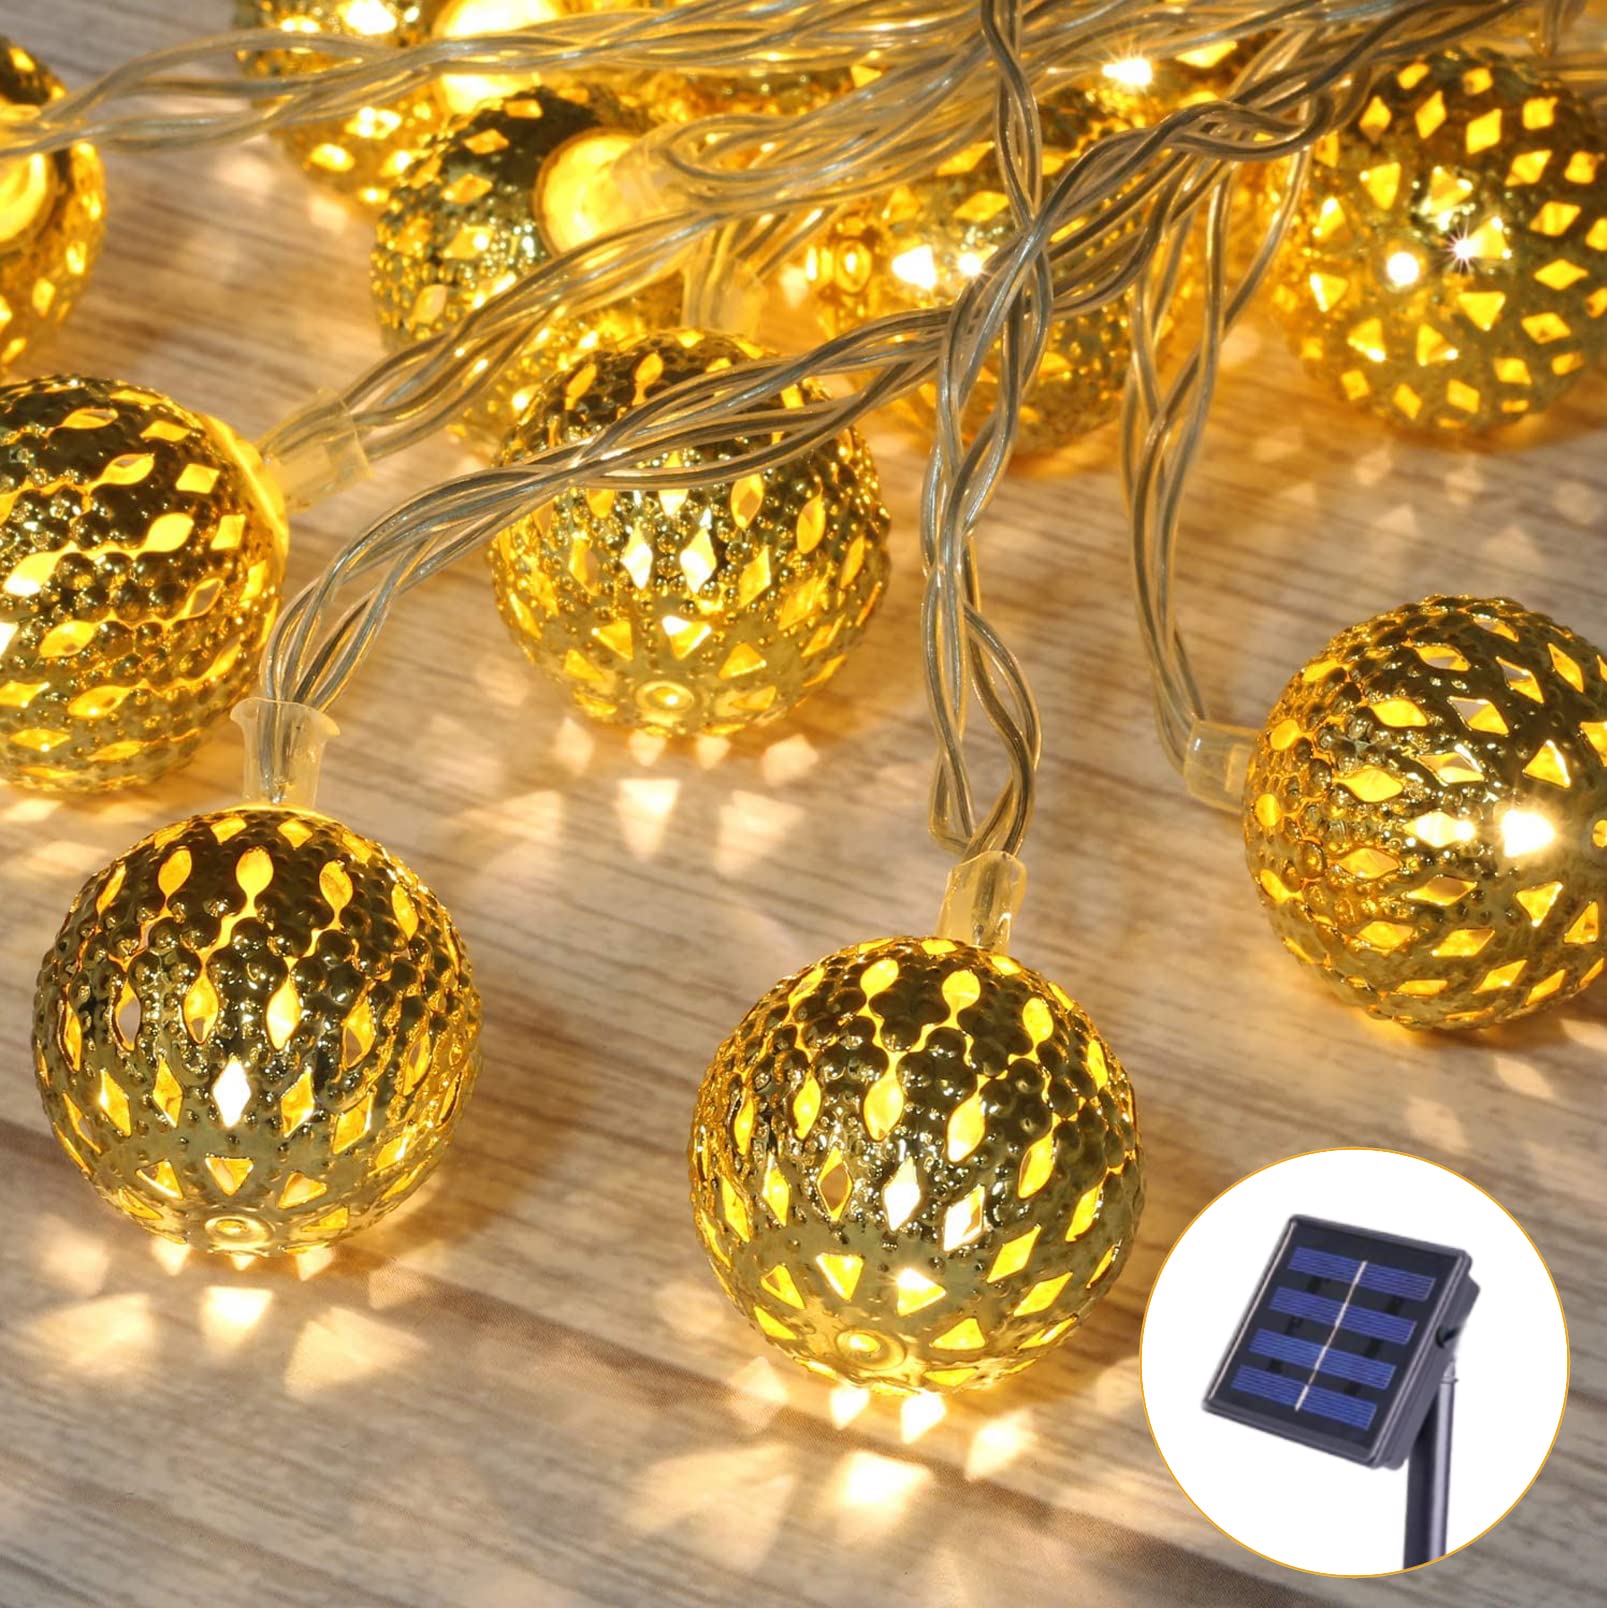 ZLDM Solar Fairy Lights, 23Ft 50 LED Solar String Lights 8 Lighting Modes, Moroccan Fairy Lights for Indoor Patio Courtyard Gazebo Christmas Lamps, IP65 Waterproof Battery Fairy Lights Garden Party